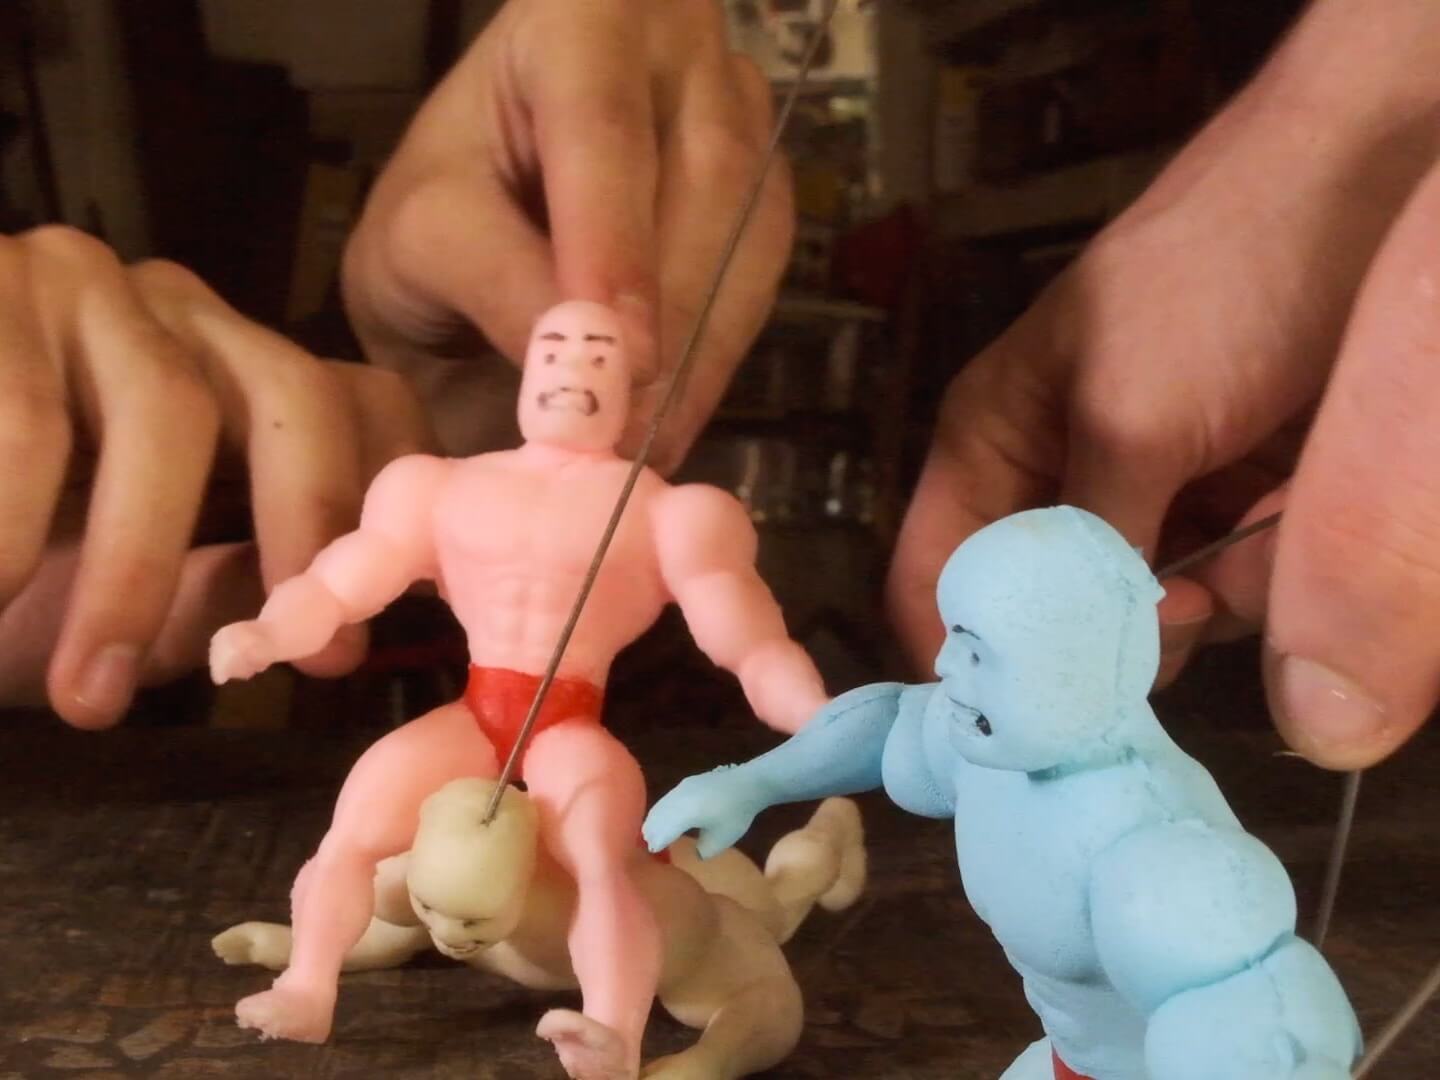 A close-up of two sets of hands using metal rods to pose a trio of 4-inch-tall foam puppets that each look like bodybuilders or professional wrestlers. Each puppet is a single pastel color, bald, barefoot, and wearing red briefs. The yellow puppet is lying with his chest on the ground and lifting his head up, while the pink puppet is straddling the yellow puppet's neck in what looks like a wrestler move. In the foreground, the blue puppet appears to be reacting with alarm to the struggle between the yellow and pink puppets.